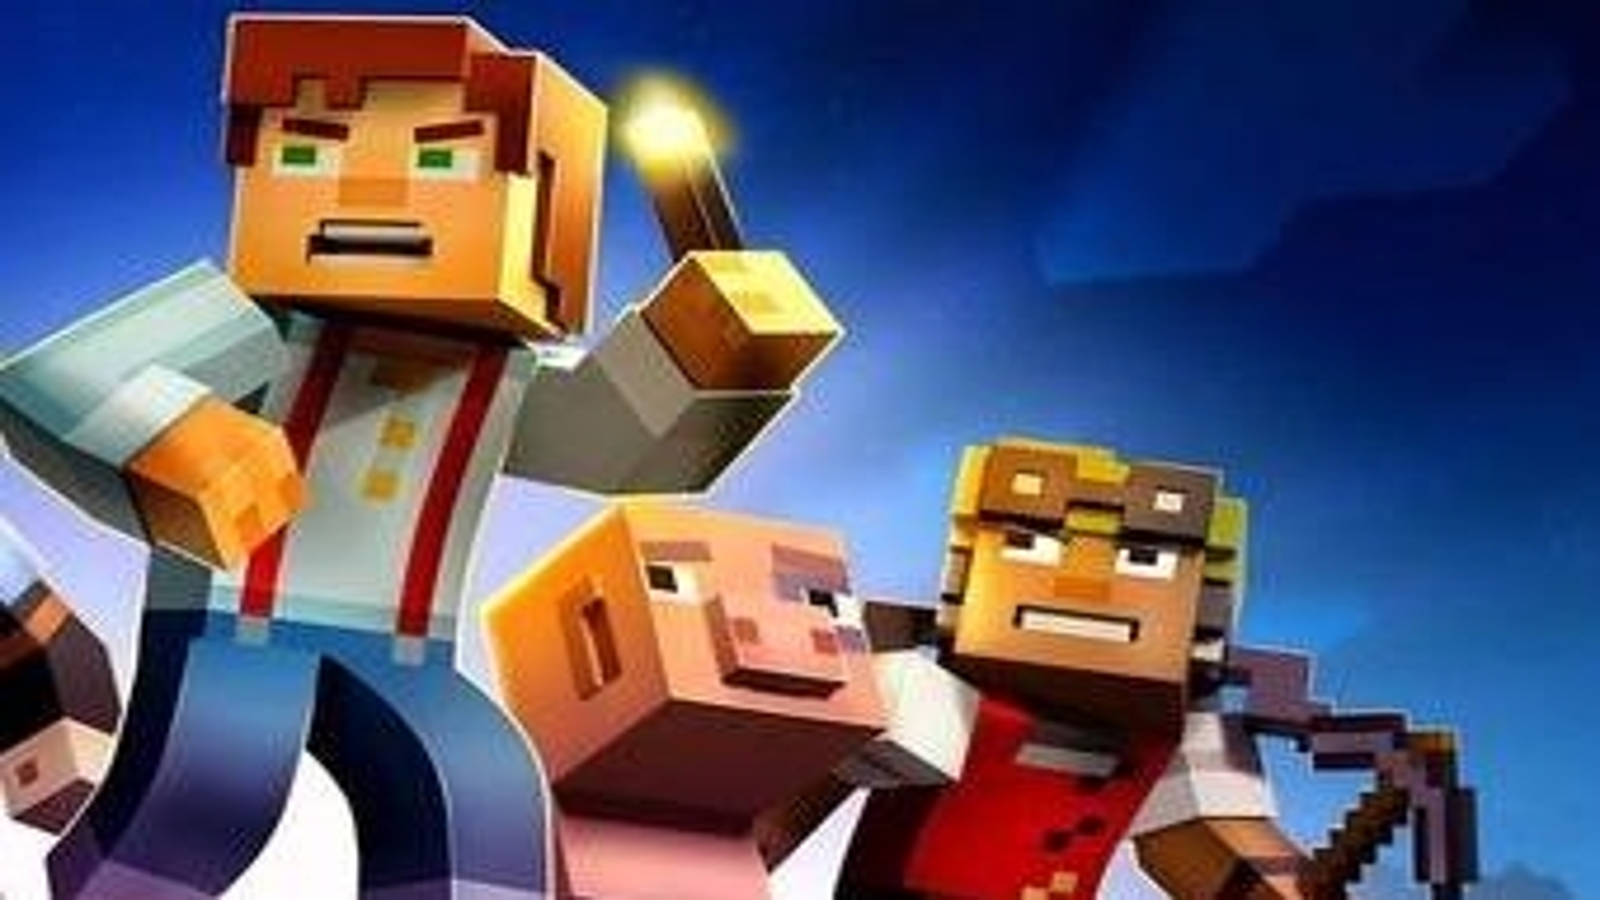 Download Minecraft: Story Mode - Season Two Free and Play on PC